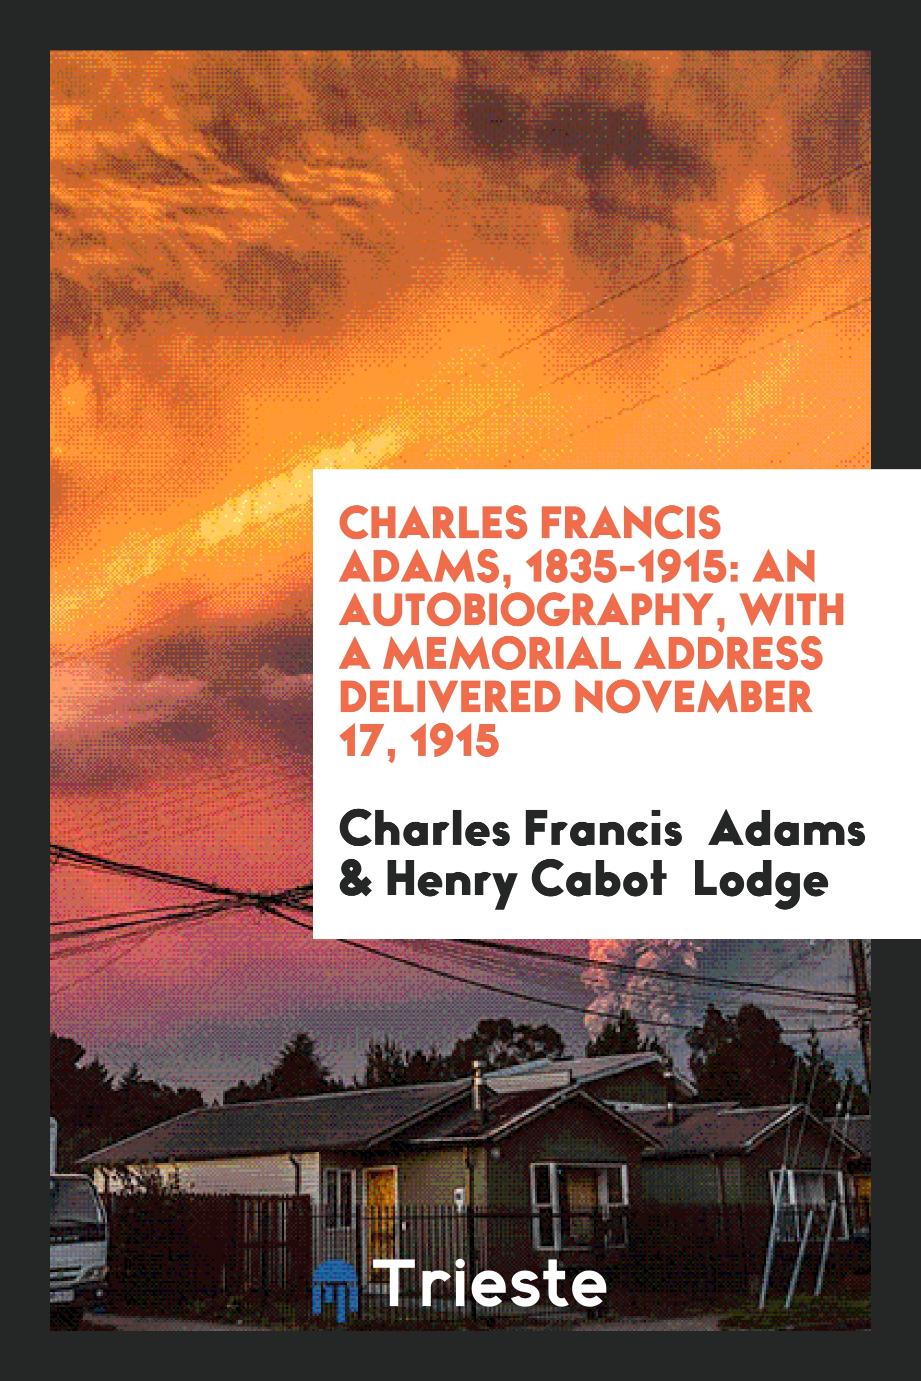 Charles Francis Adams, 1835-1915: An Autobiography, with a Memorial address delivered November 17, 1915